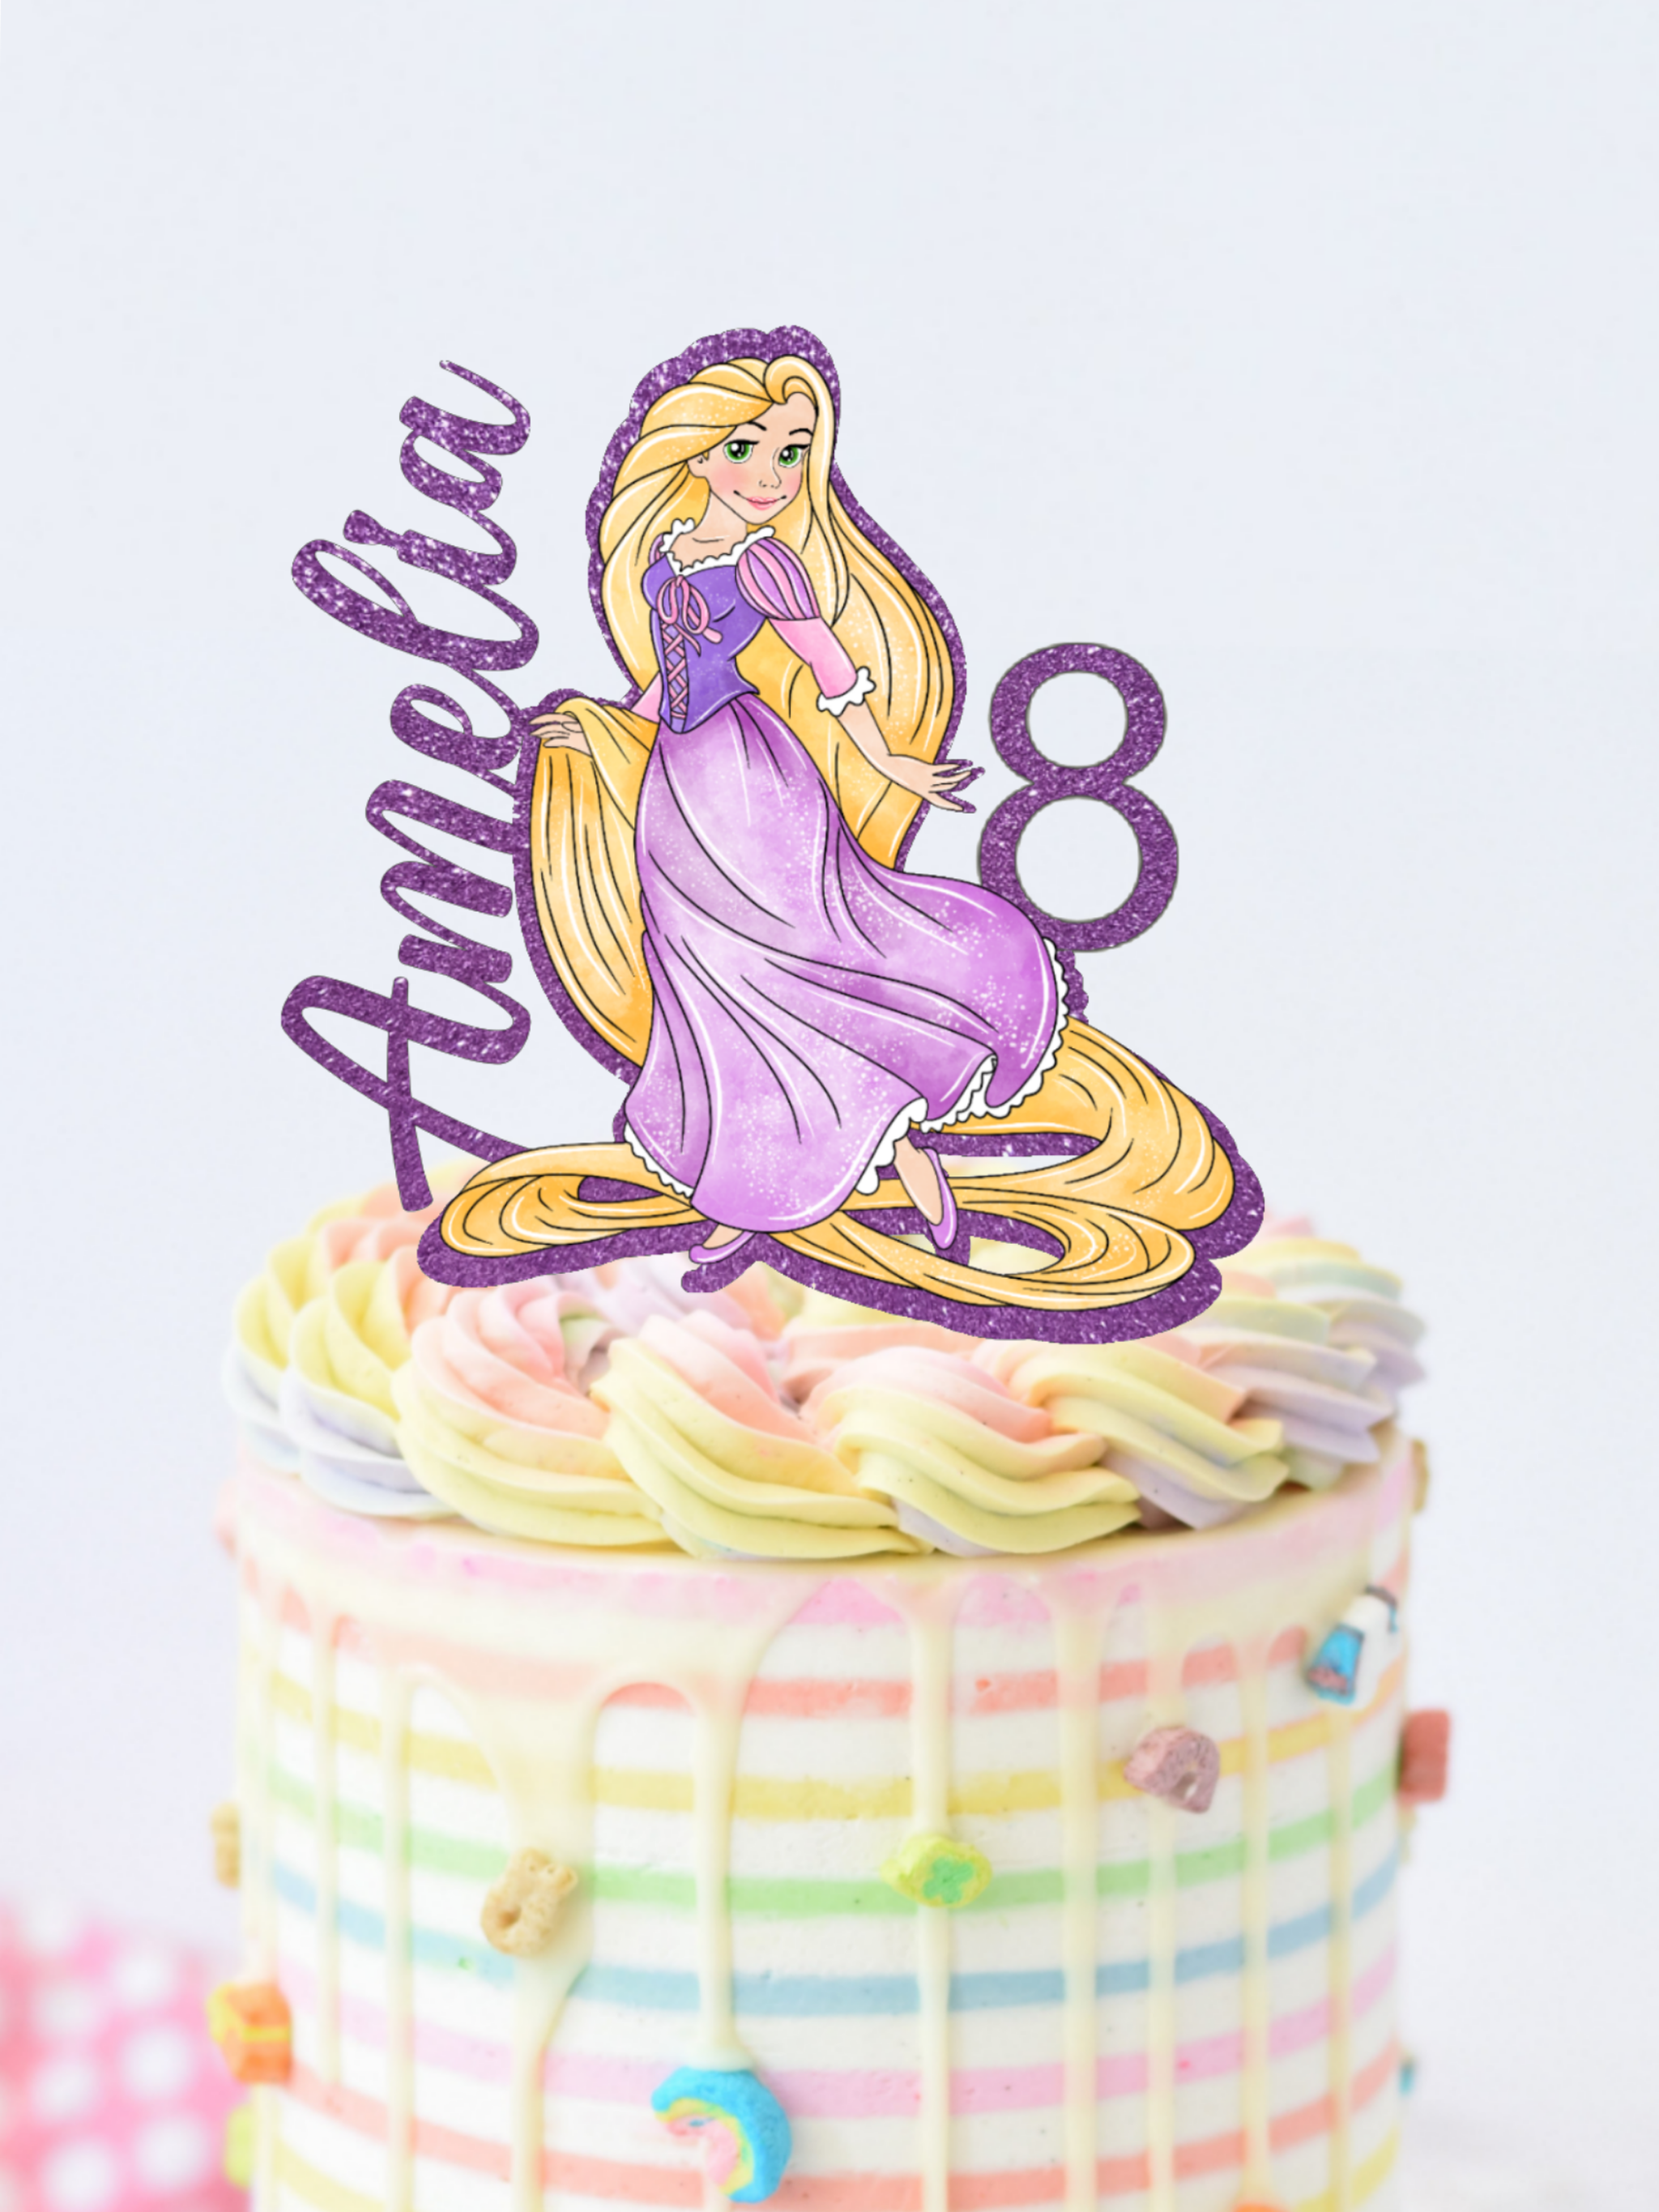 Tangled Rapunzel Flowers and Pascal Edible Cake Topper Image ABPID01745 |  Edible cake toppers, Edible cake, Cake